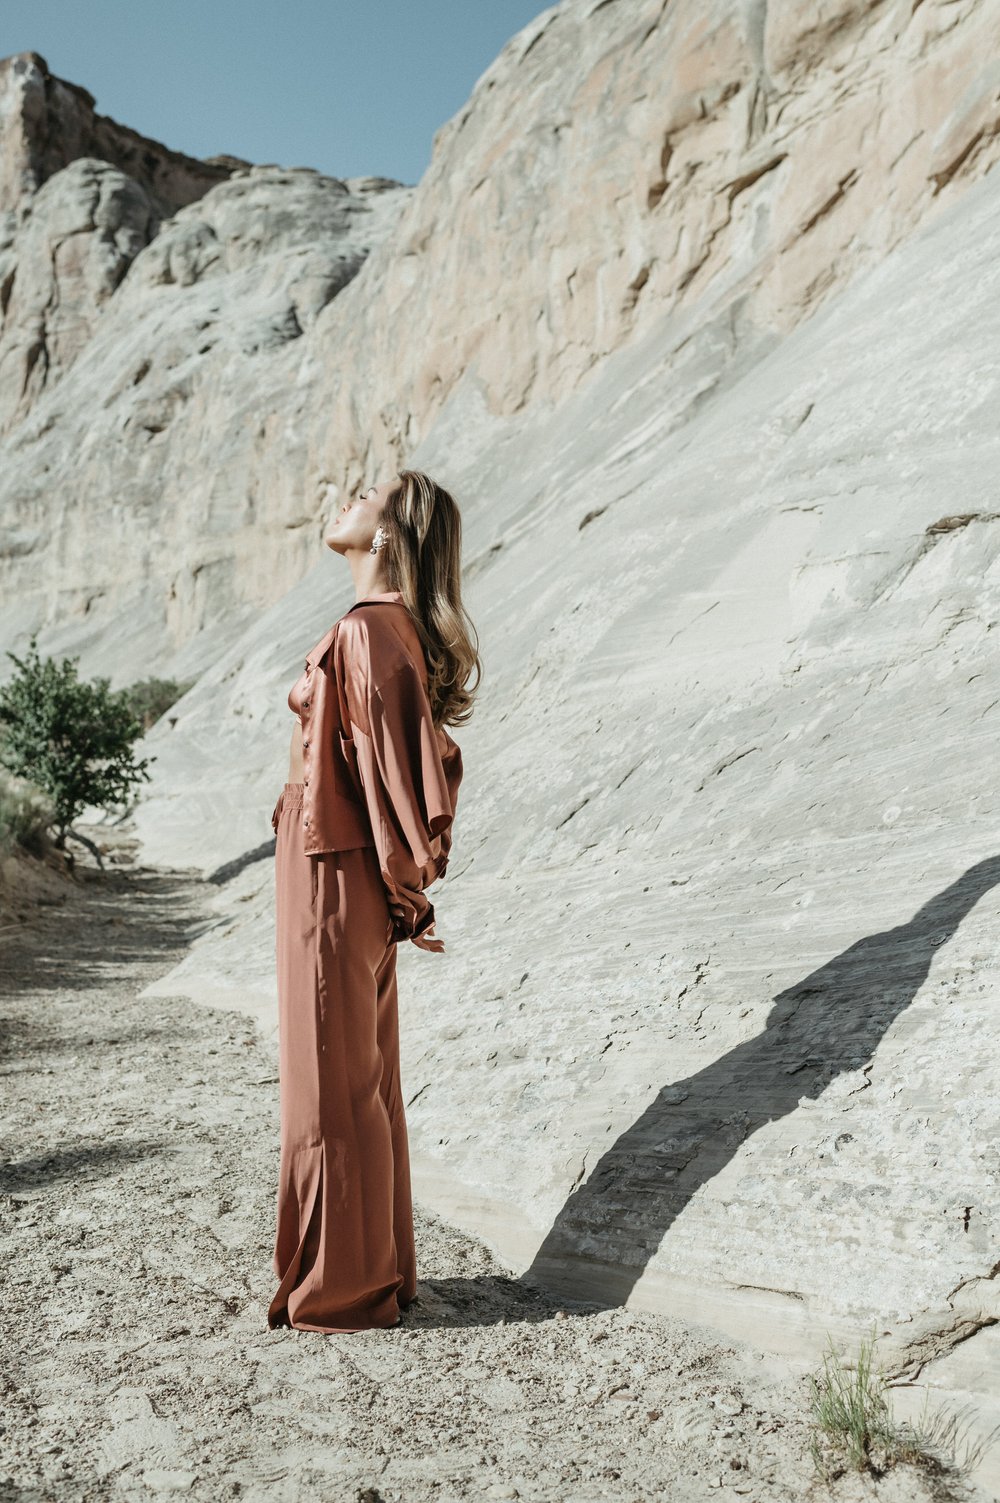 woman in desert in mauve silk loungewear hands behind back shadow on rock behind her eyes closed face tilted toward sun